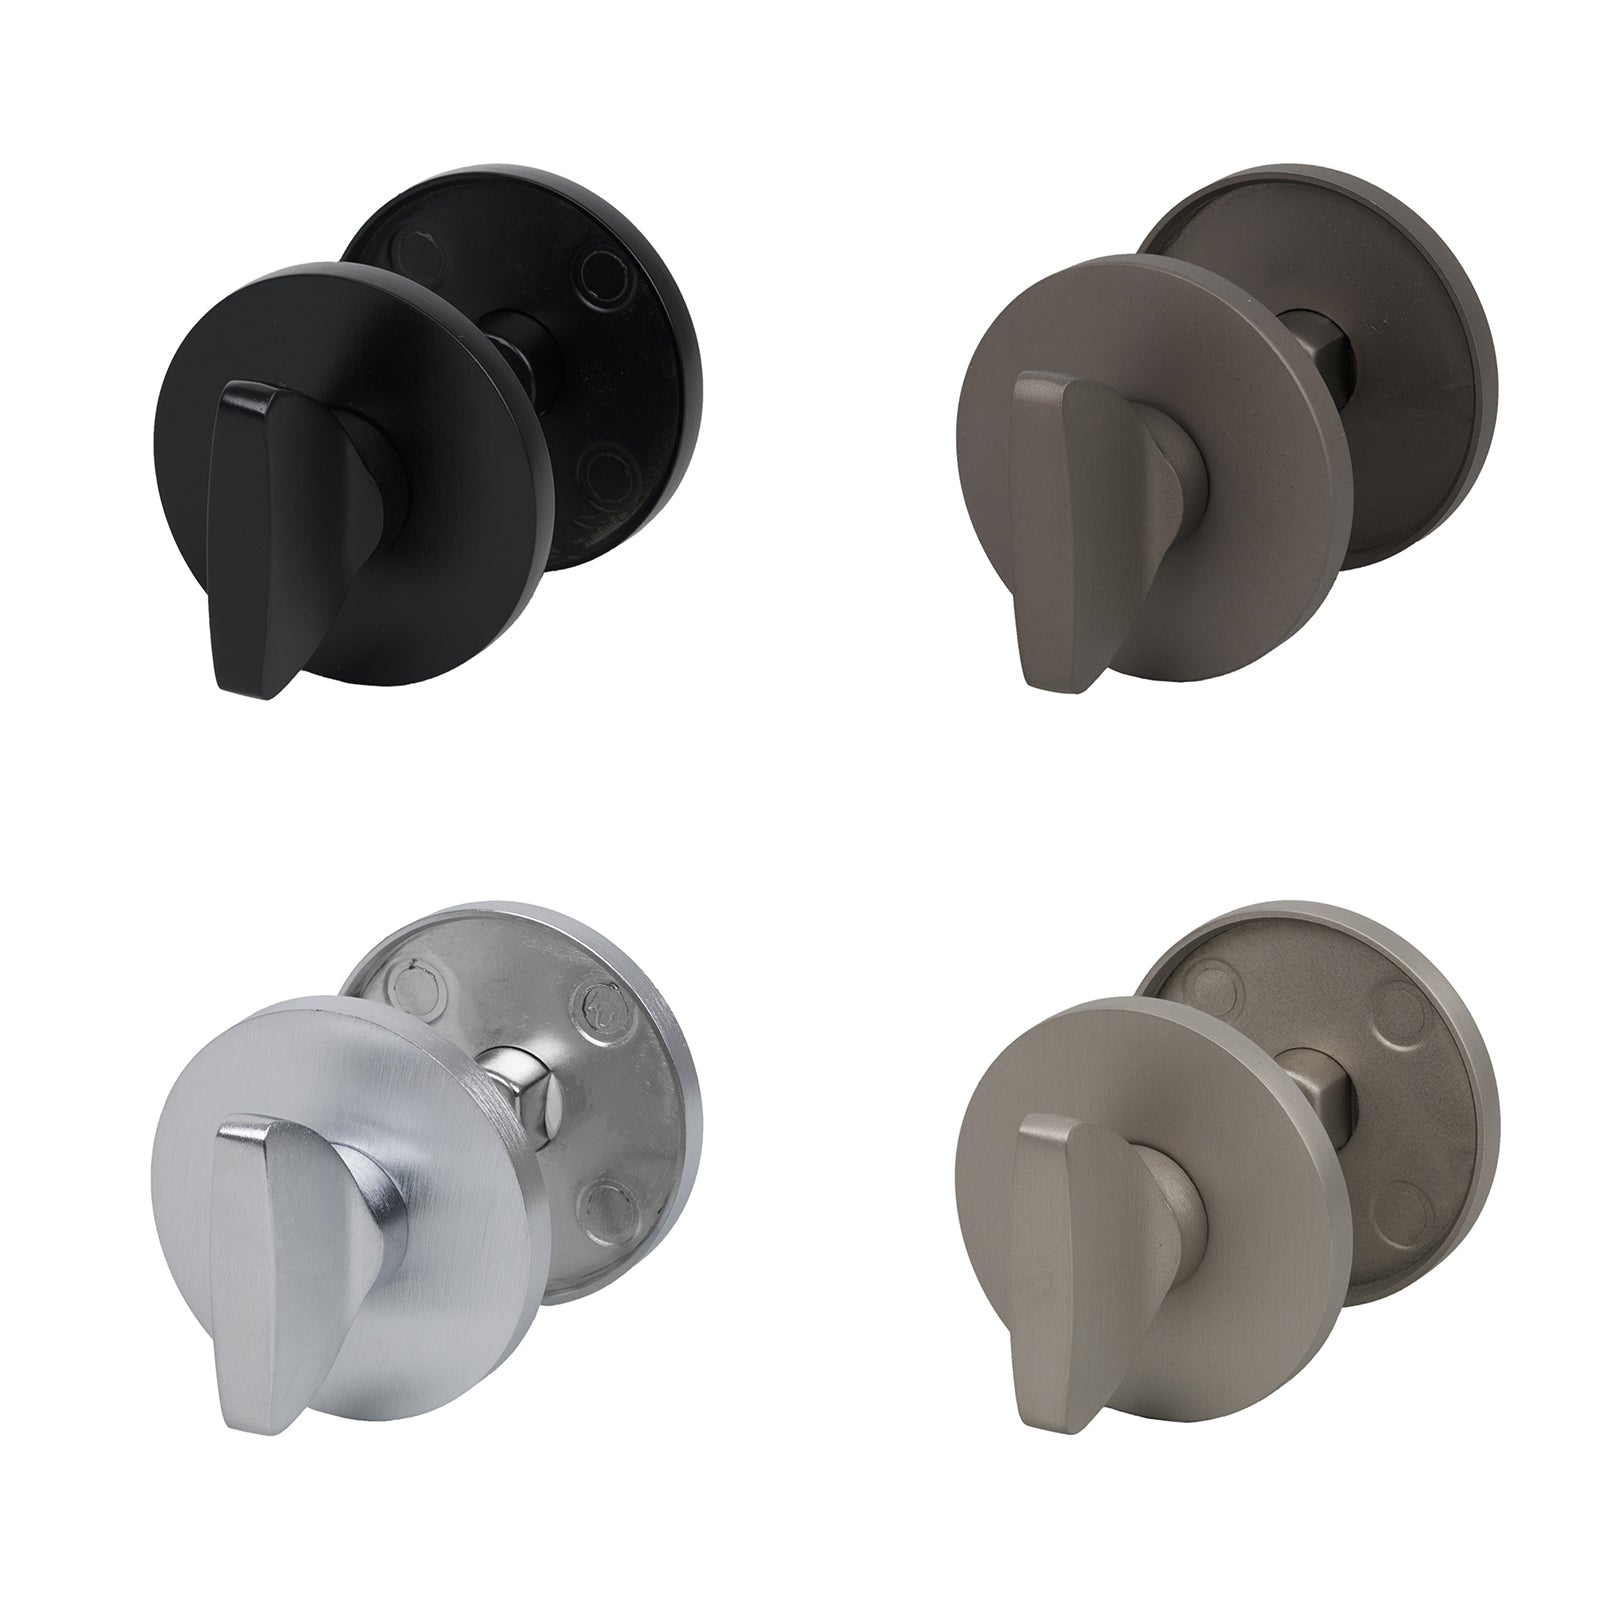 Tupai round rose bathroom turn and release, in four finishes, Nickel Pearl, Black Pearl, Satin Chrome, and Titan.